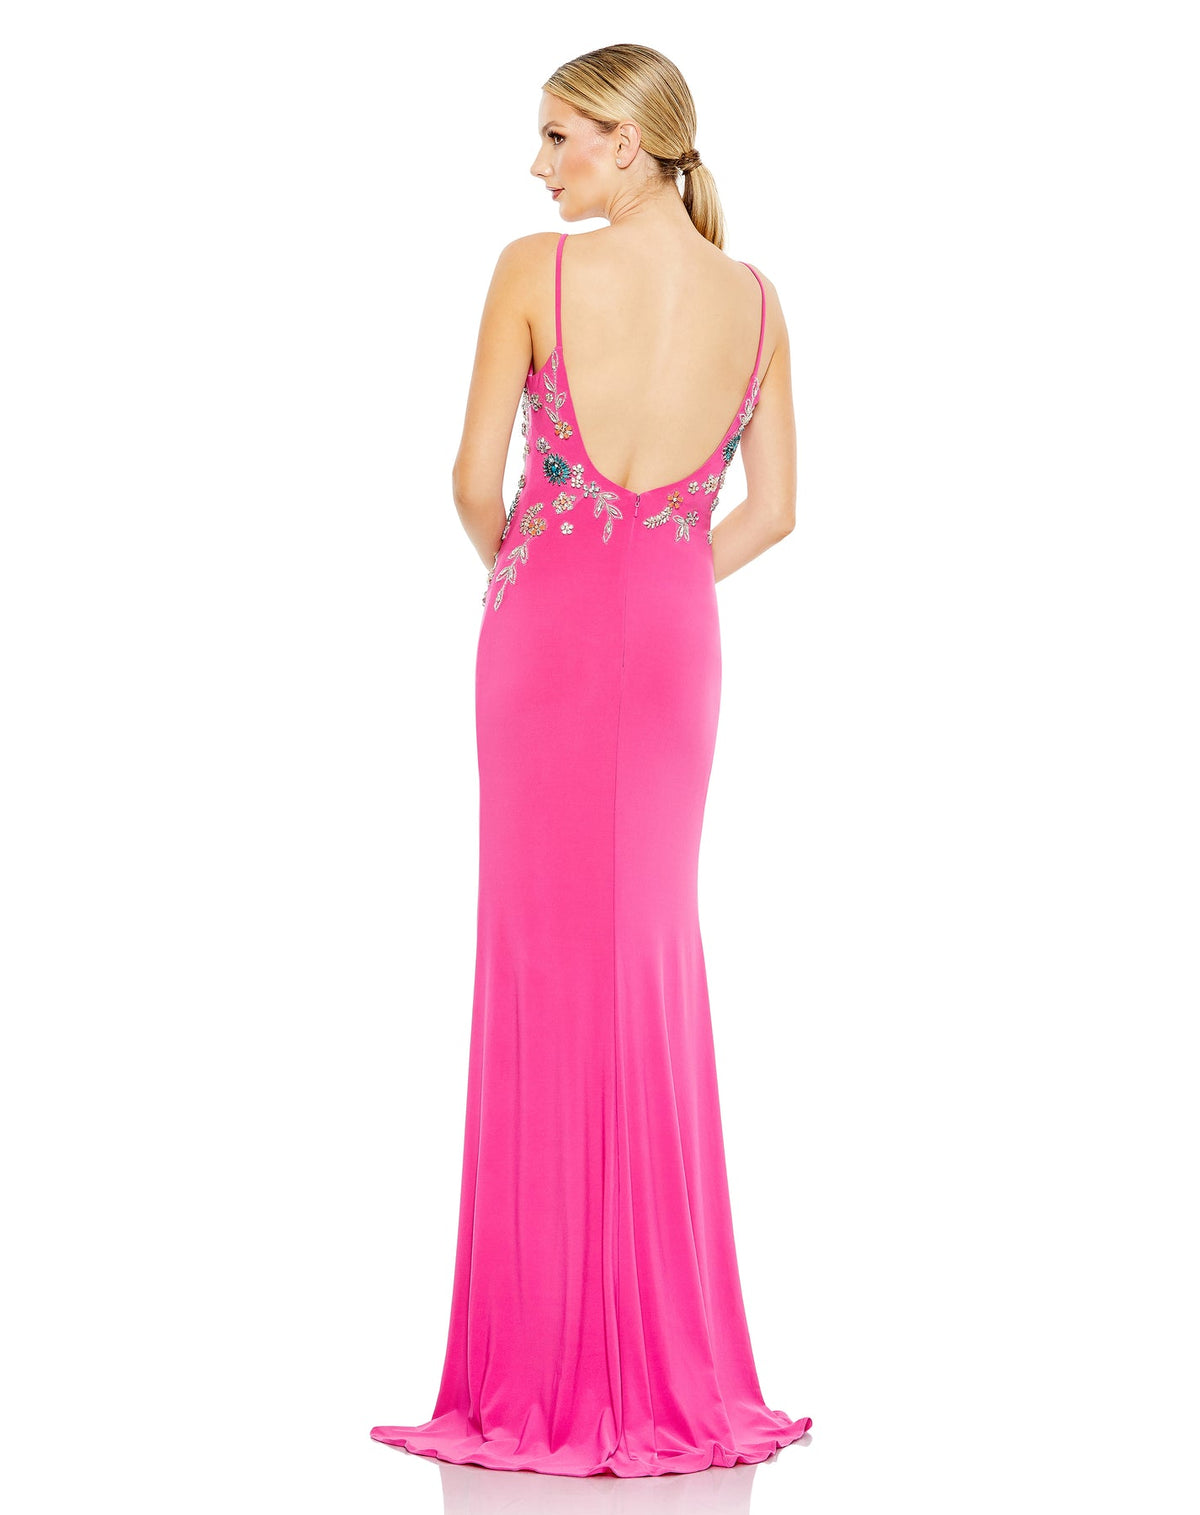 Mac Duggal, Multi Colour Beaded Floral Cami Gown - Candy Pink  | Shop Prom Dresses, Wedding Guest Dresses, and Black Tie Evening Gowns Online at SHAIDE!  BACK